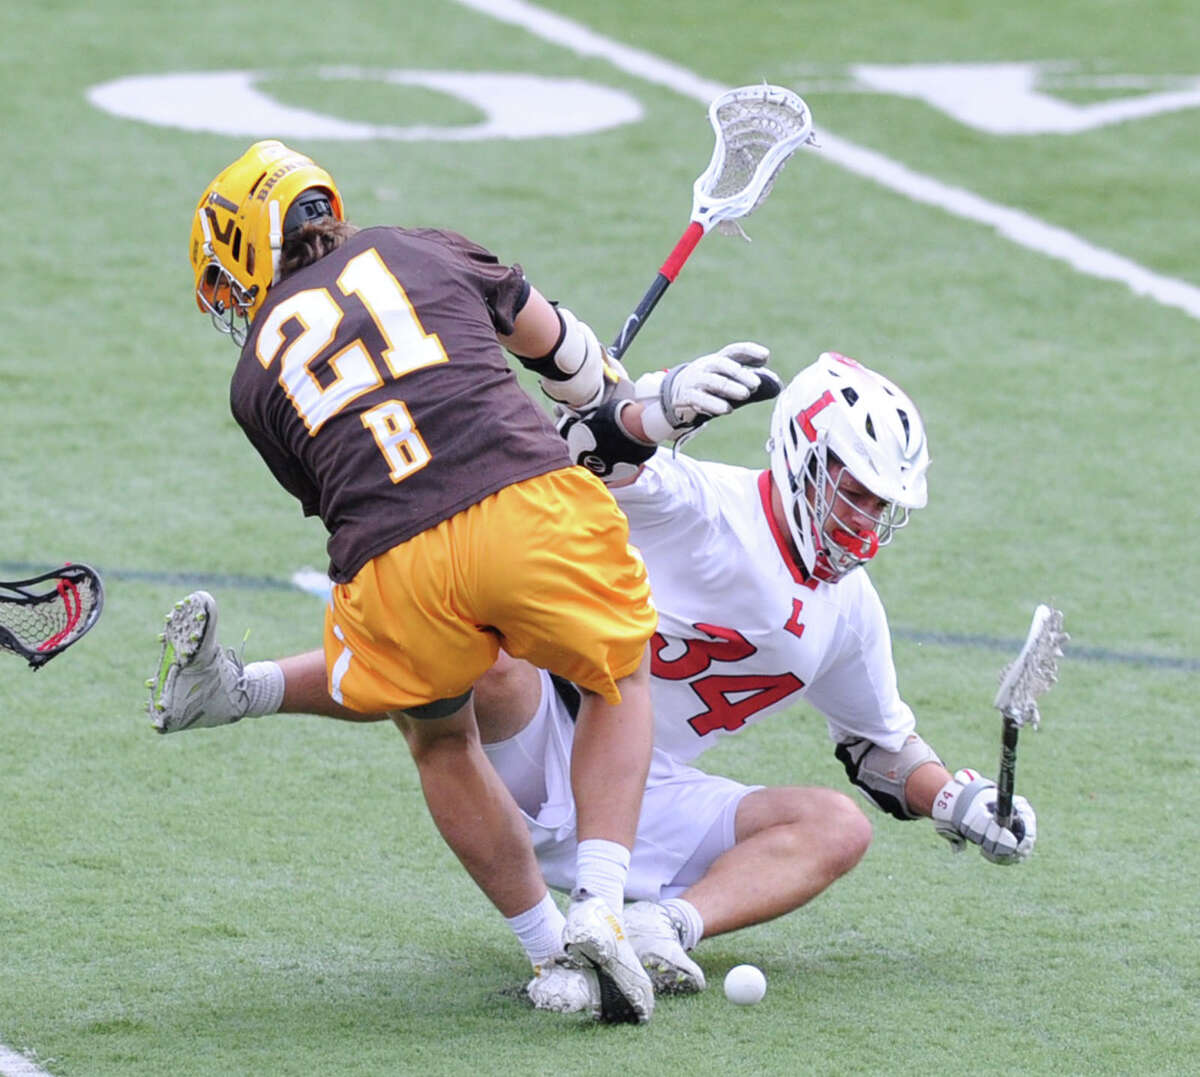 At left, John Fox (#21) of Brunswick takes down Lawrenceville's Charles Burditt (#34) with a check making Burditt lose the ball during the boys high school lacrosse match between Brunswick School and Lawrenceville School at Brunswick in Greenwich, Conn., Wednesday, April 22, 2015. Brunswick won the match, 18-8.